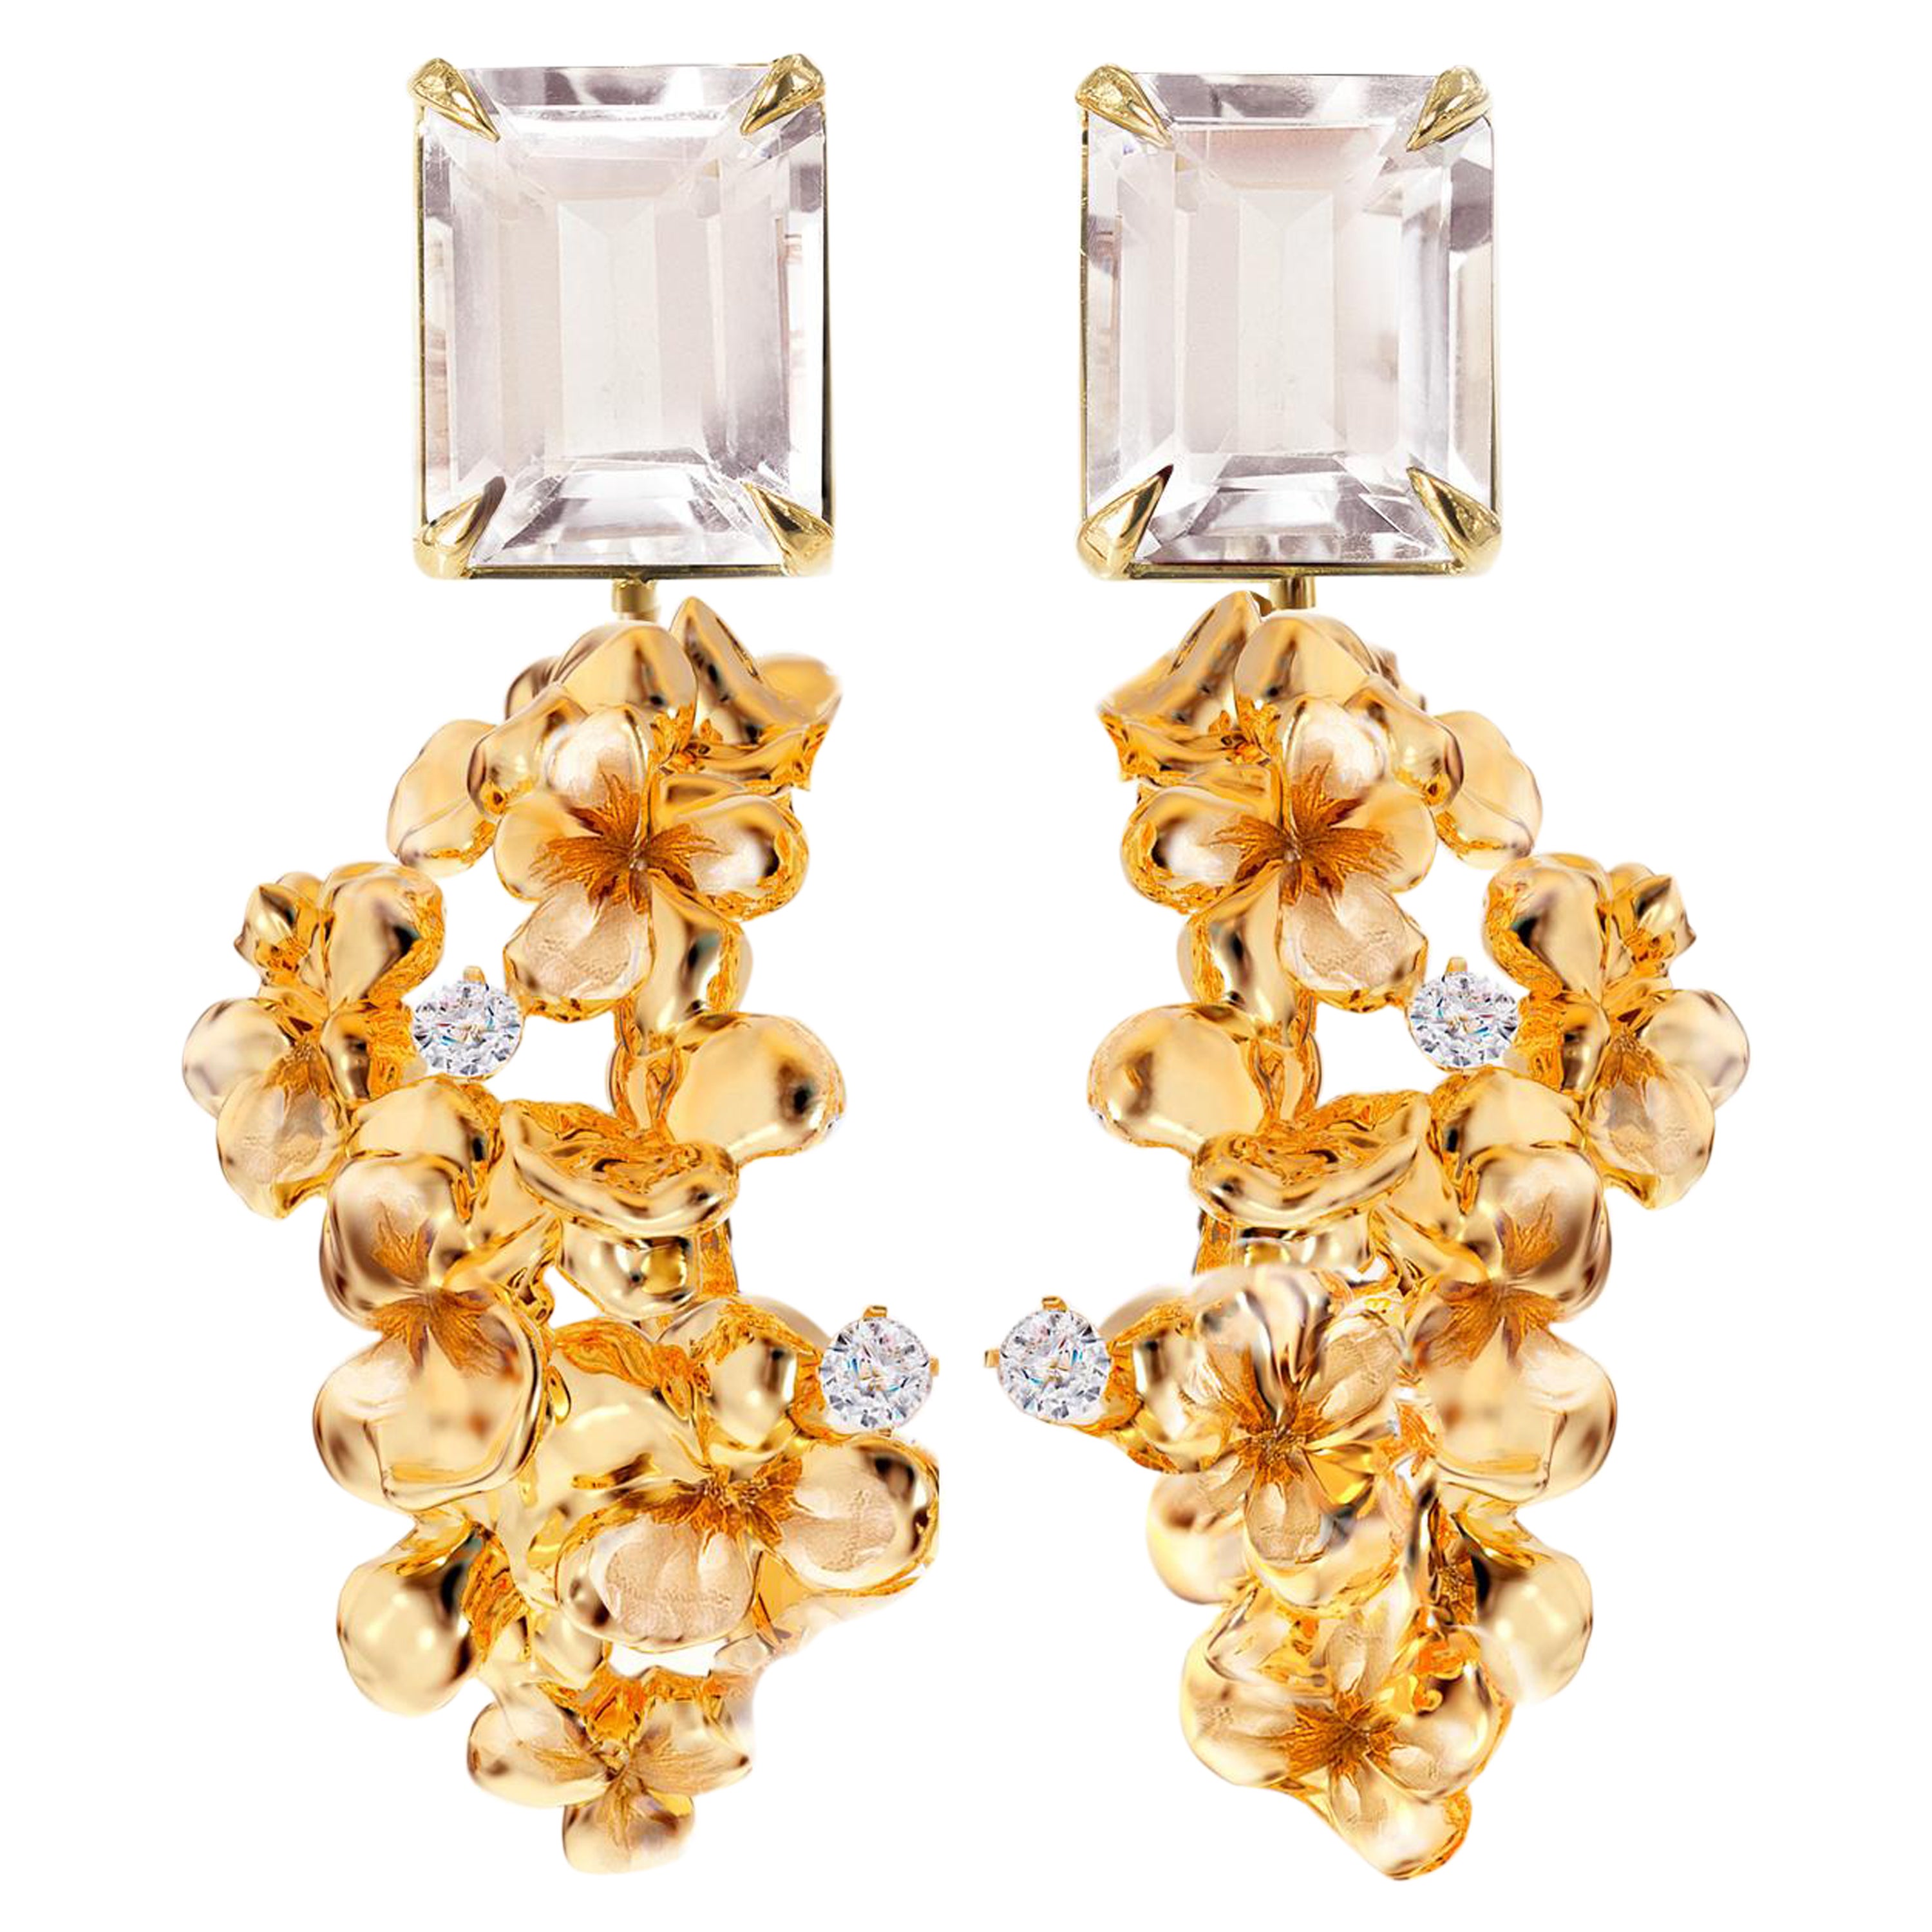 Eighteen Karat Yellow Gold Clip-on Earrings with Diamonds and Morganites